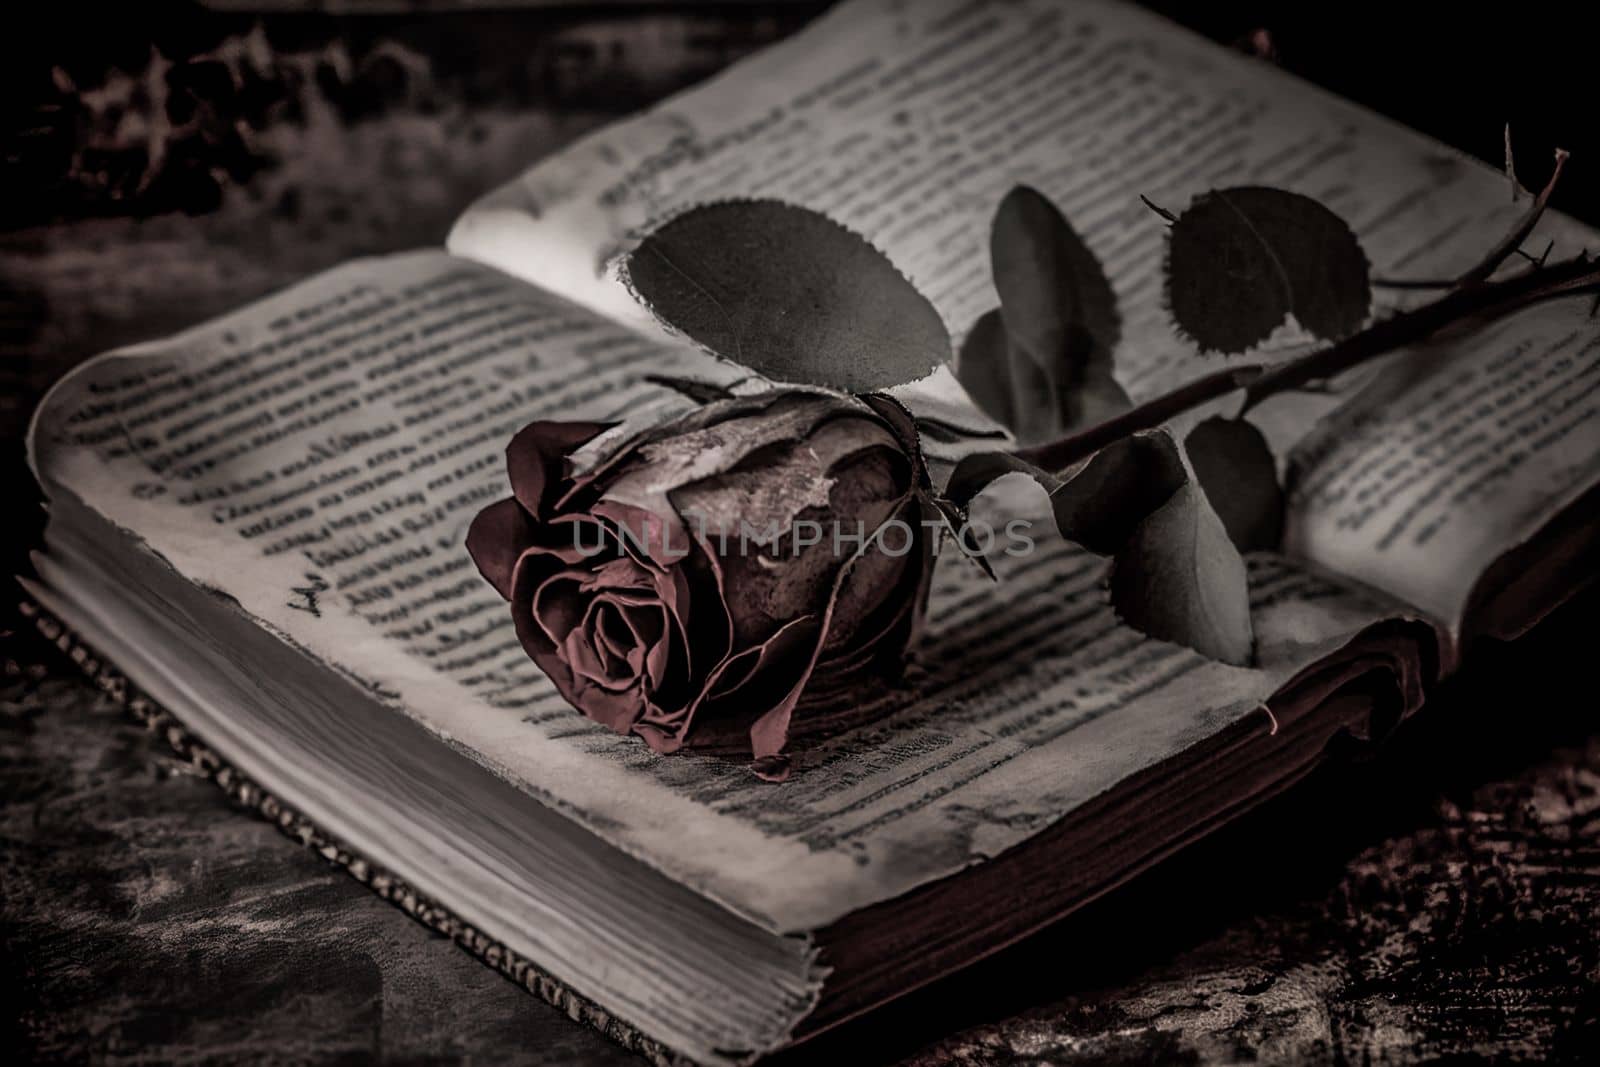 A dried red rose placed upon an old book conjures memories of a past romance. 3D illustration